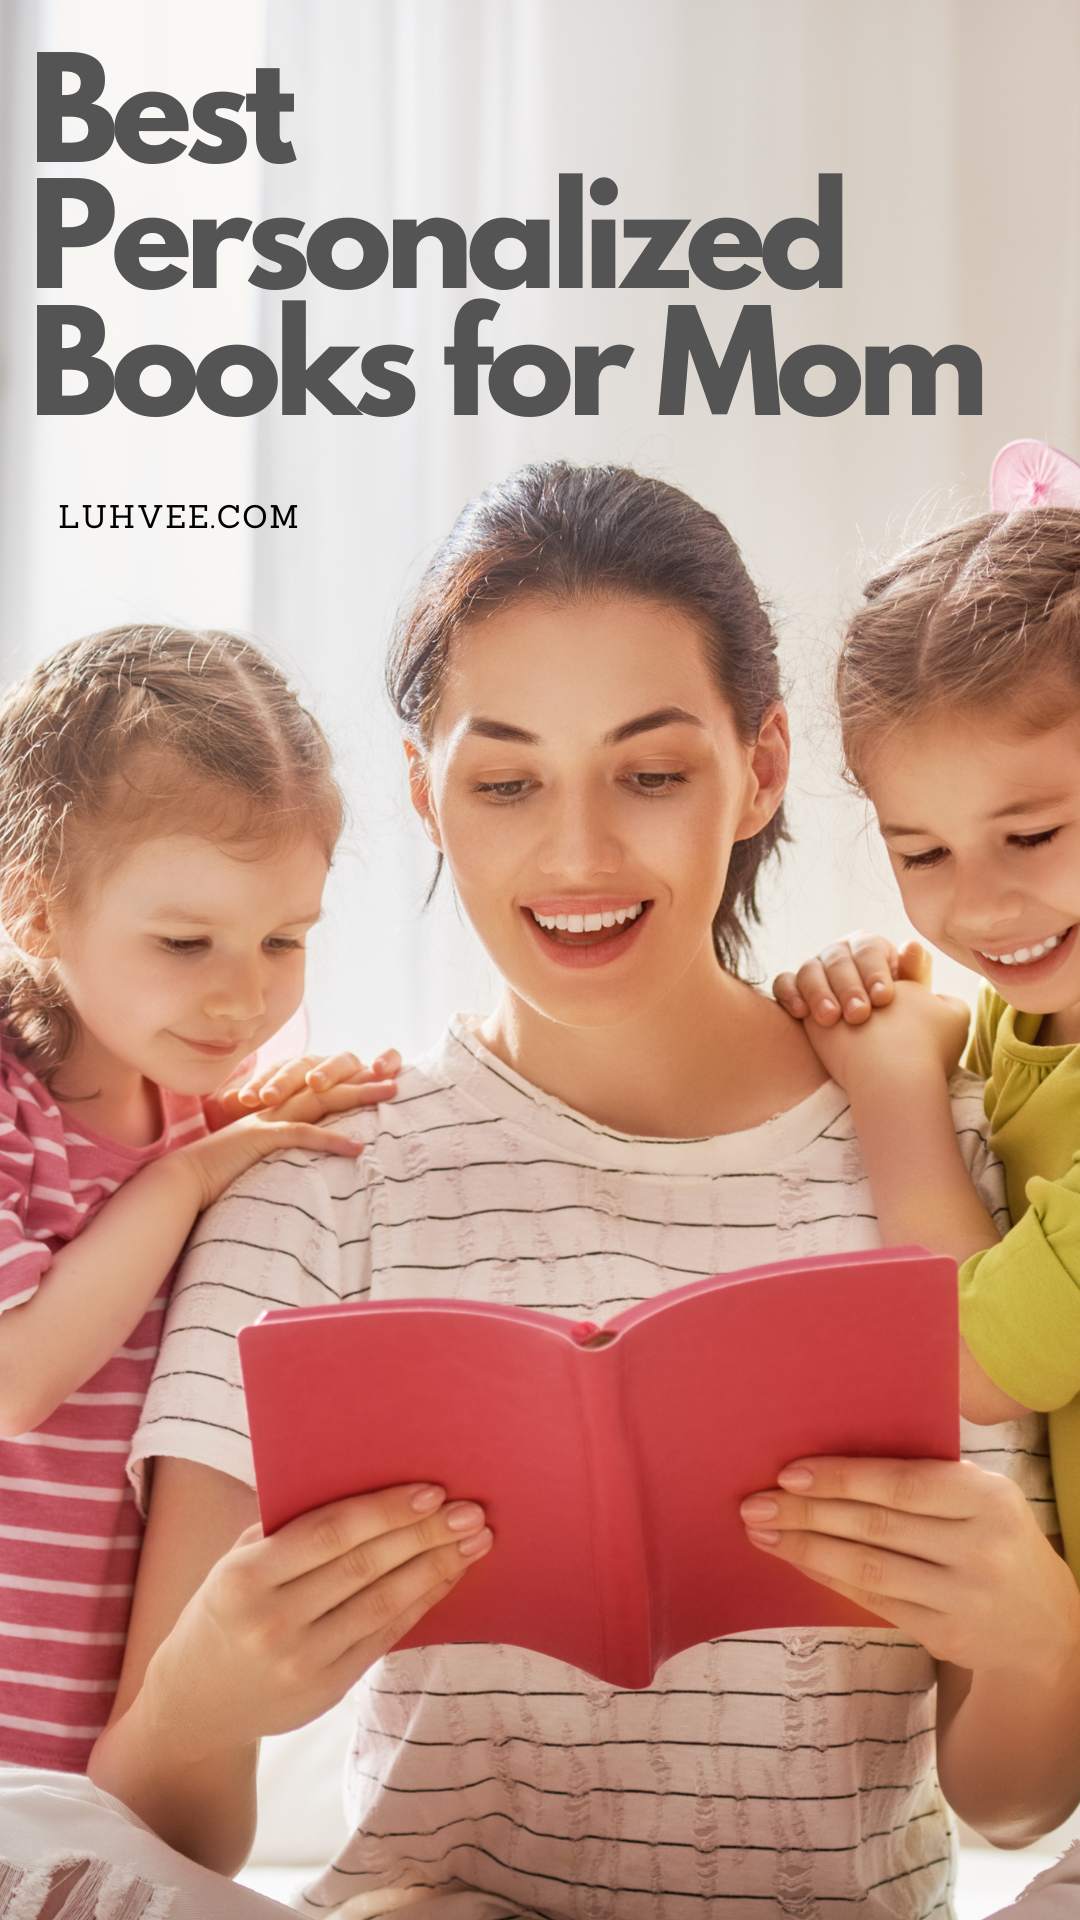 Best Personalized Books for Mom